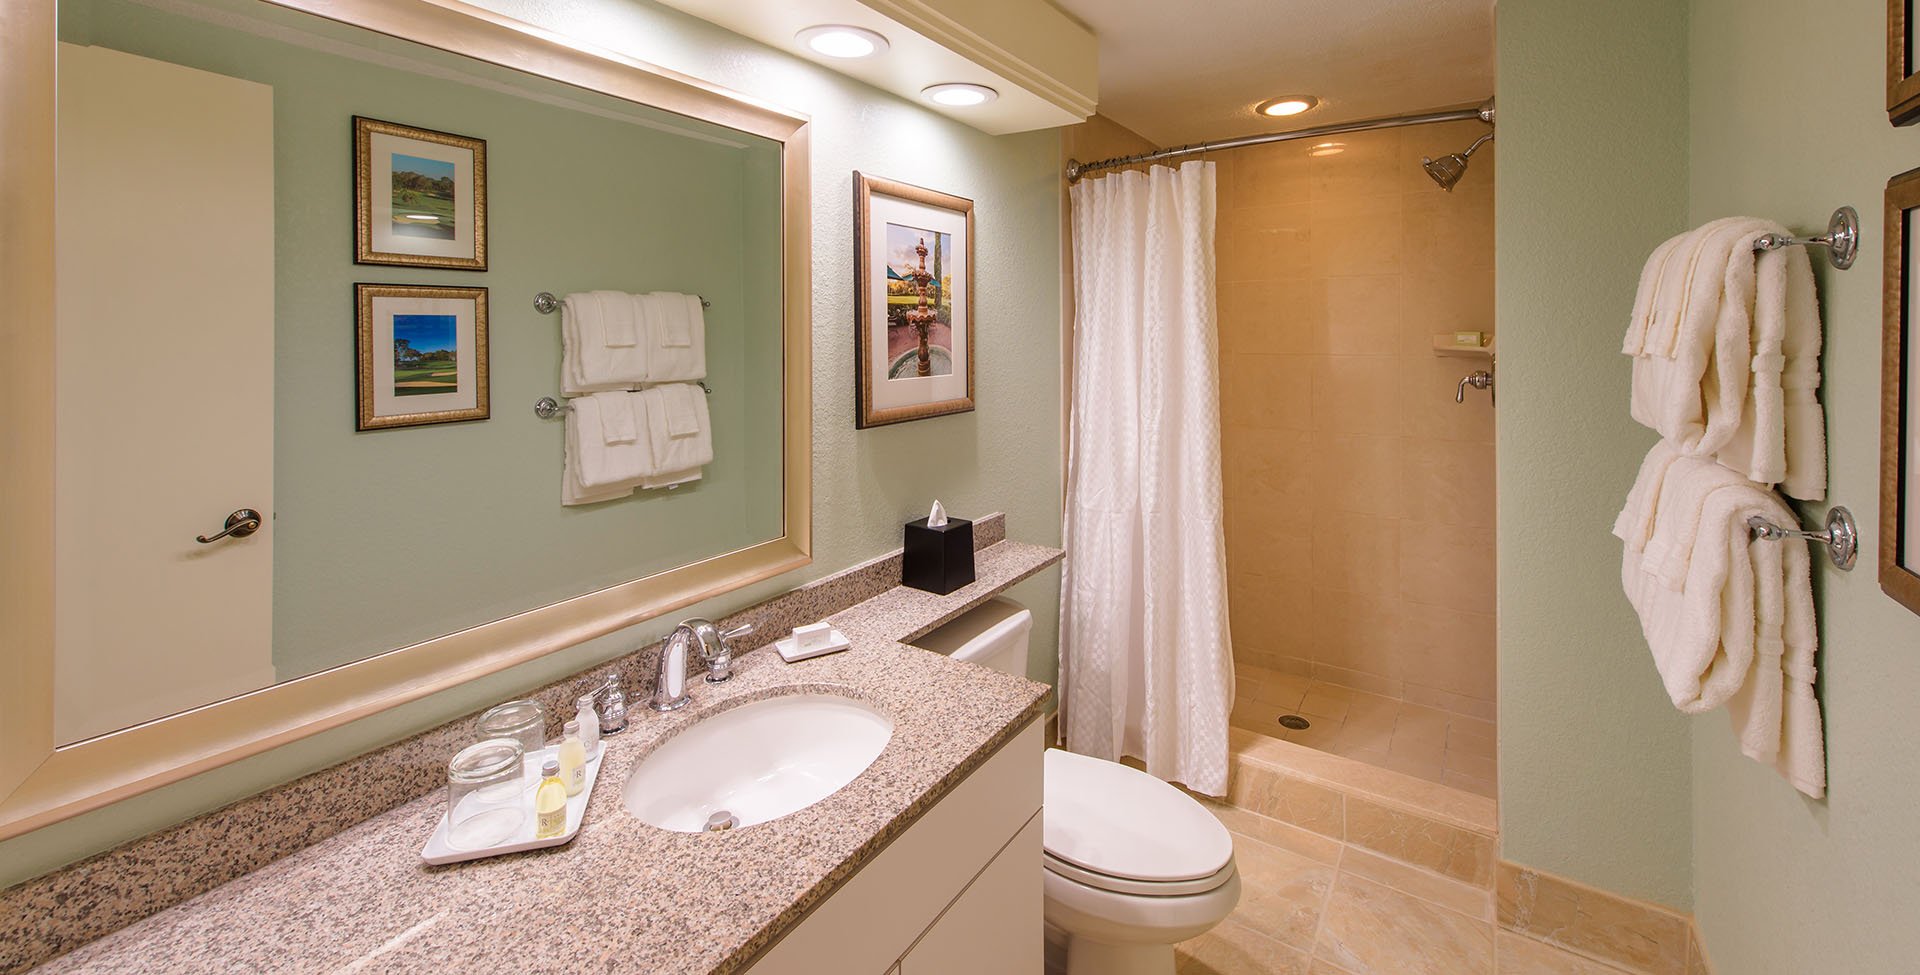 a bathroom in one of the hotel rooms